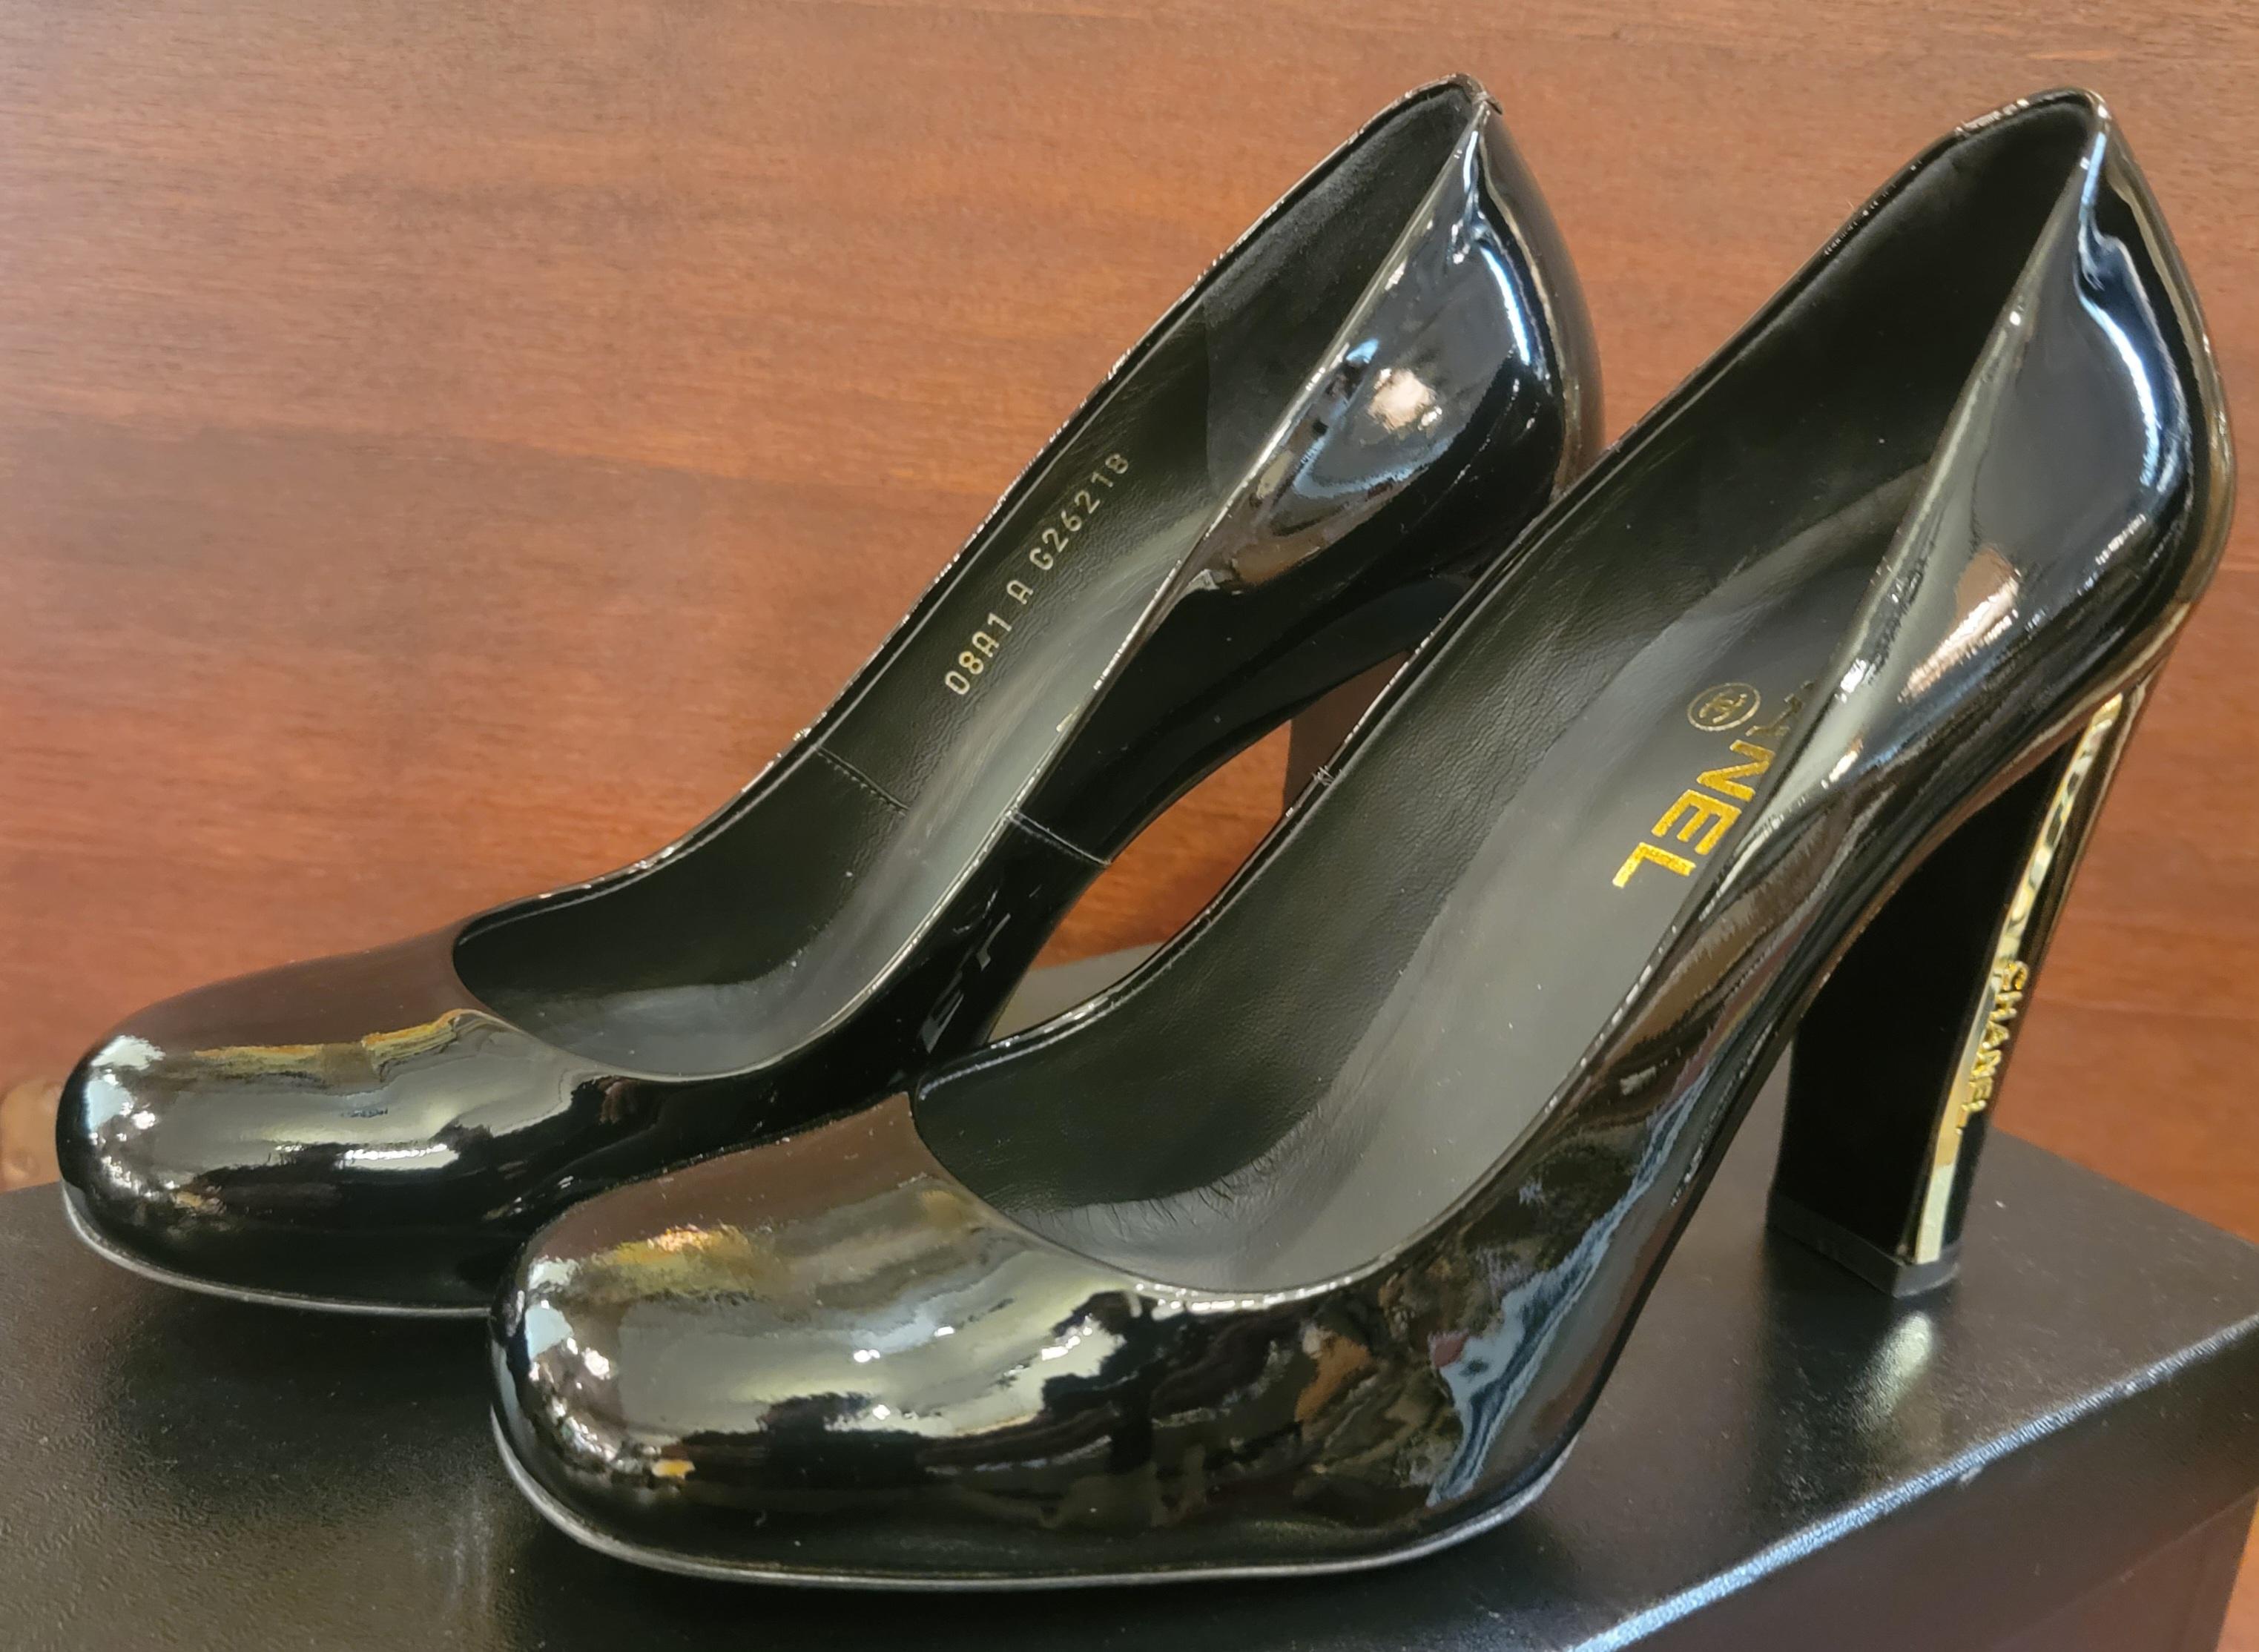 Rare Authentic Brand New never used Chanel Leather Size 39.5 High Heel Shoes with Chanel Gold Accent. the heels have metal Gold accents of Chanel Written out. Beautiful design, sleek and sexy. 